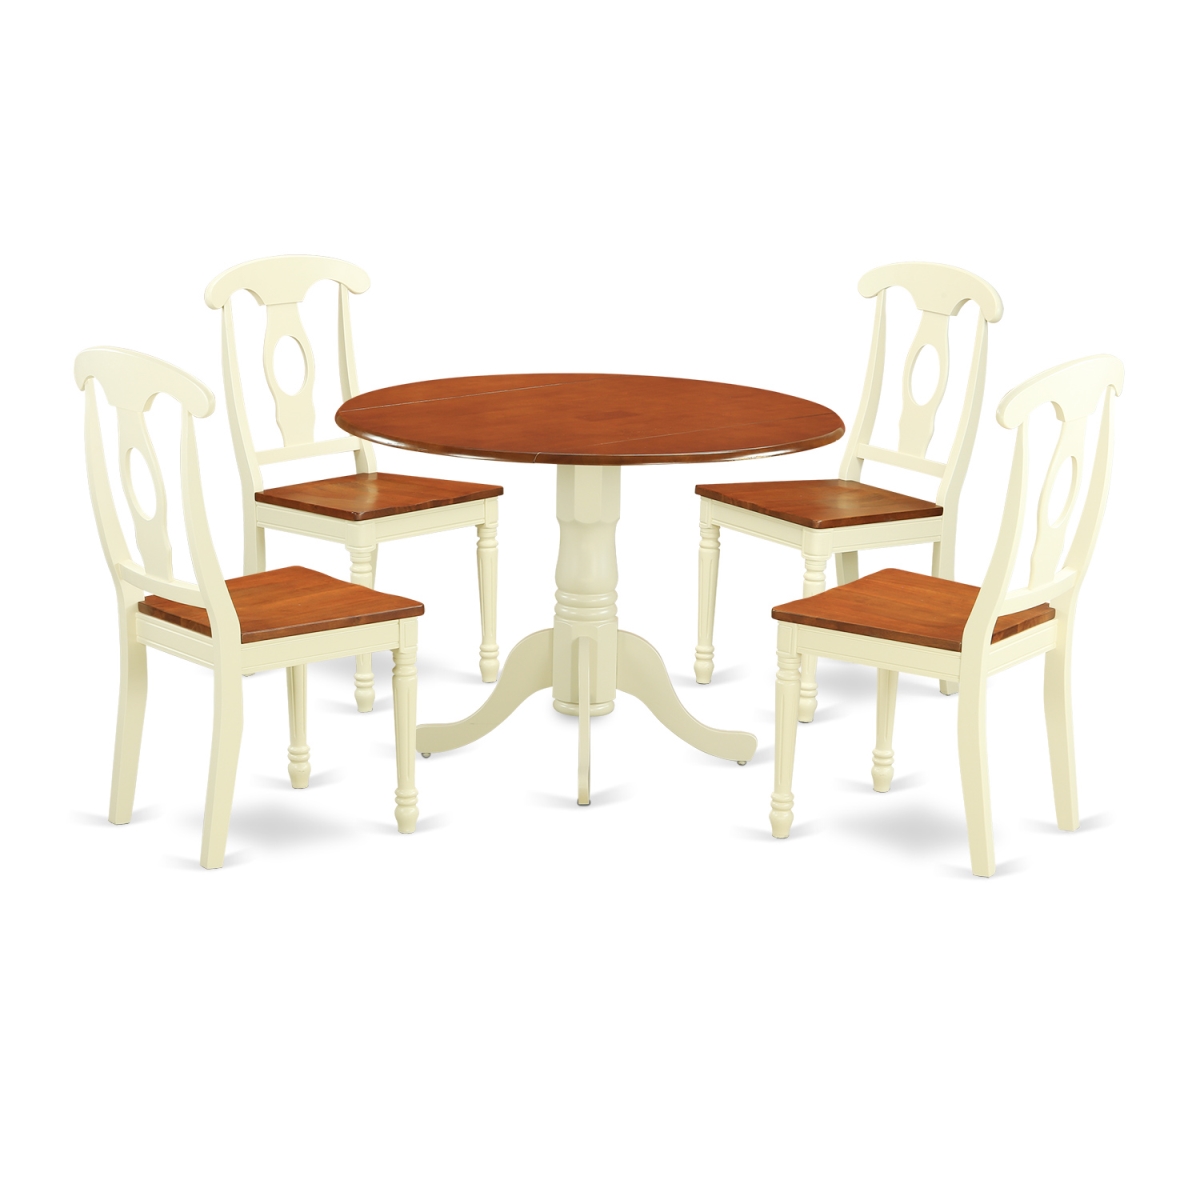 Picture of East West Furniture DLKE5-BMK-W Dining Set - Table & 4 Chairs, Buttermilk & Cherry - 5 Piece